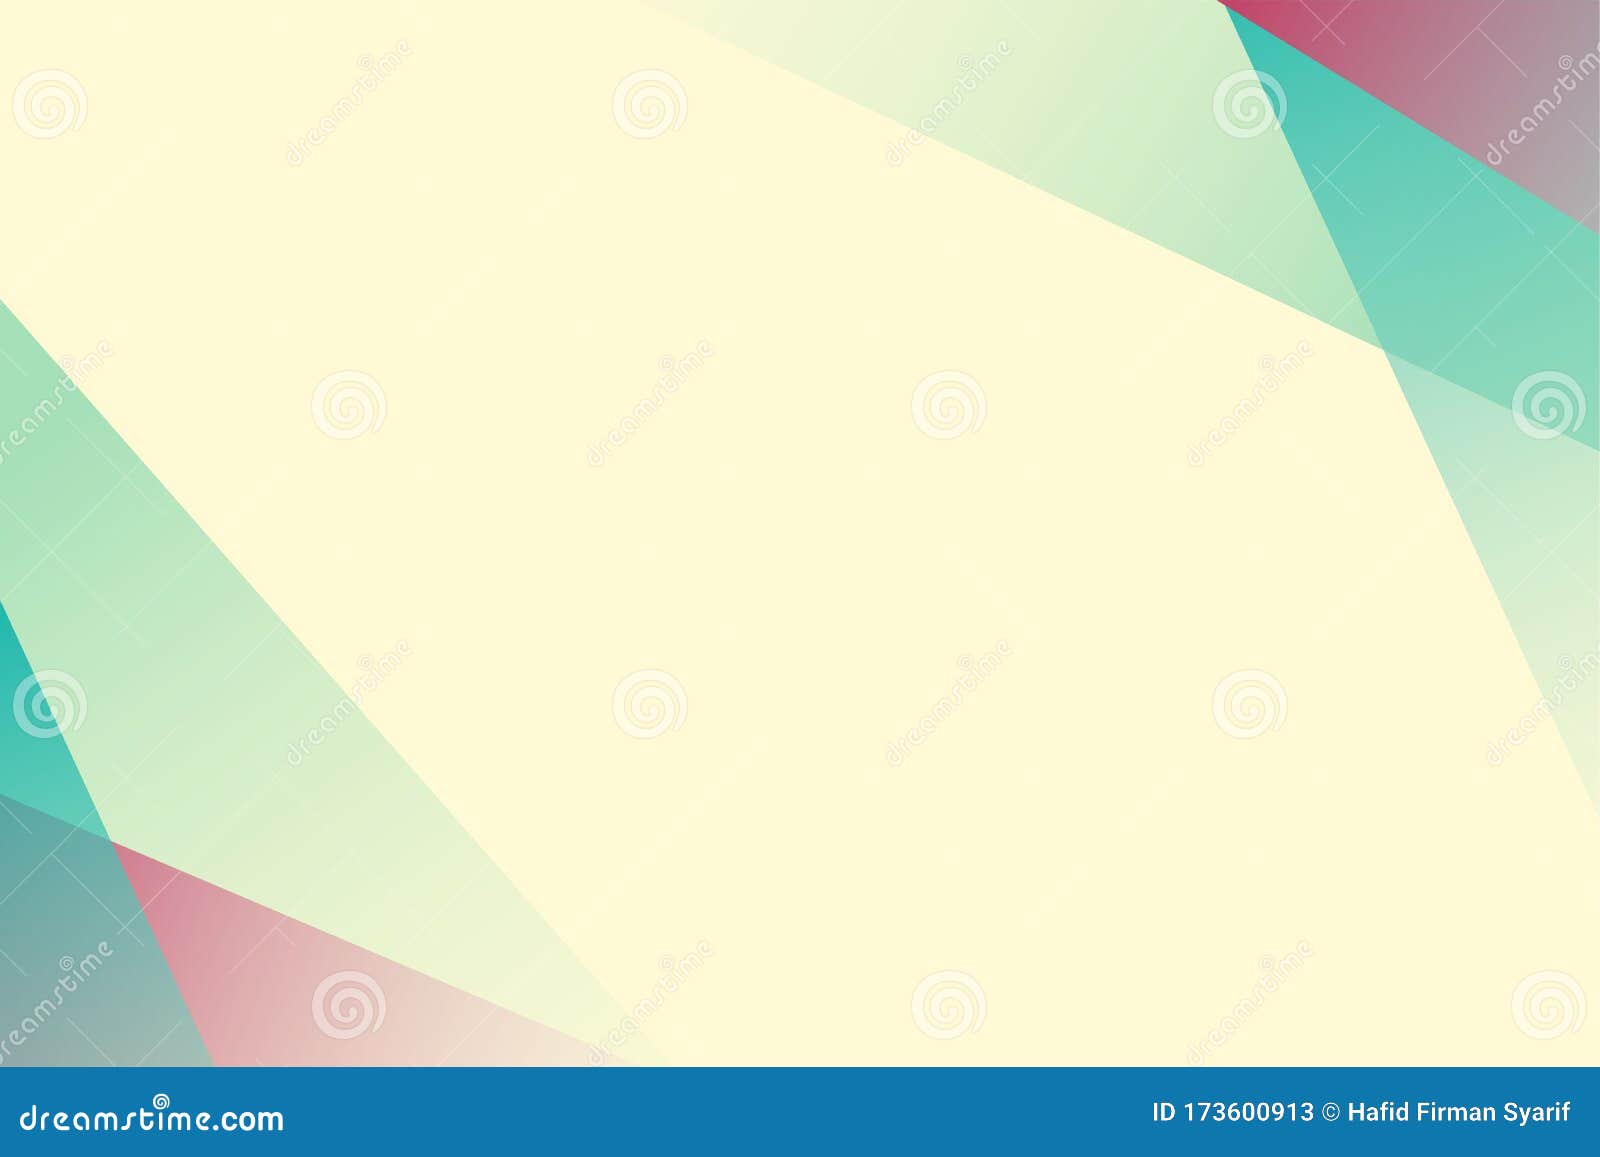 Simple Colorful Pastel Geometric Background Design, Purple Turquoise  Gradient Wallpaper Template Vector Stock Vector - Illustration of light,  banner: 173600913